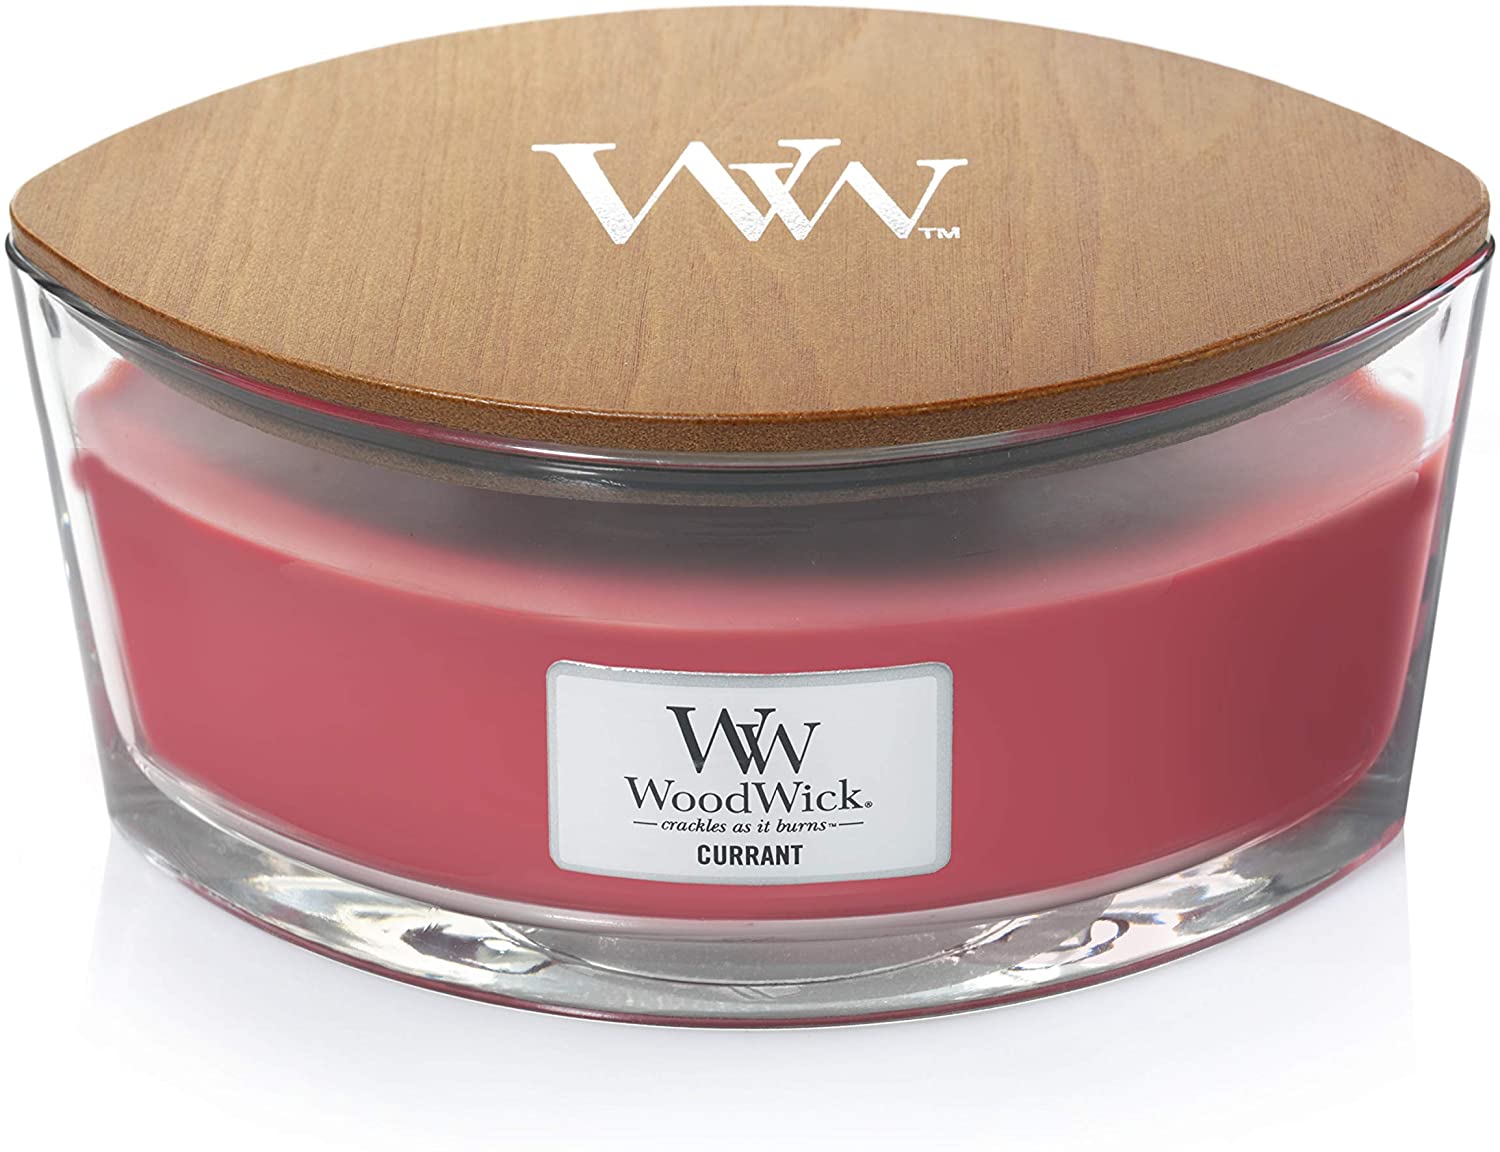 Woodwick Ellipse Scented Candle - Black Cherry